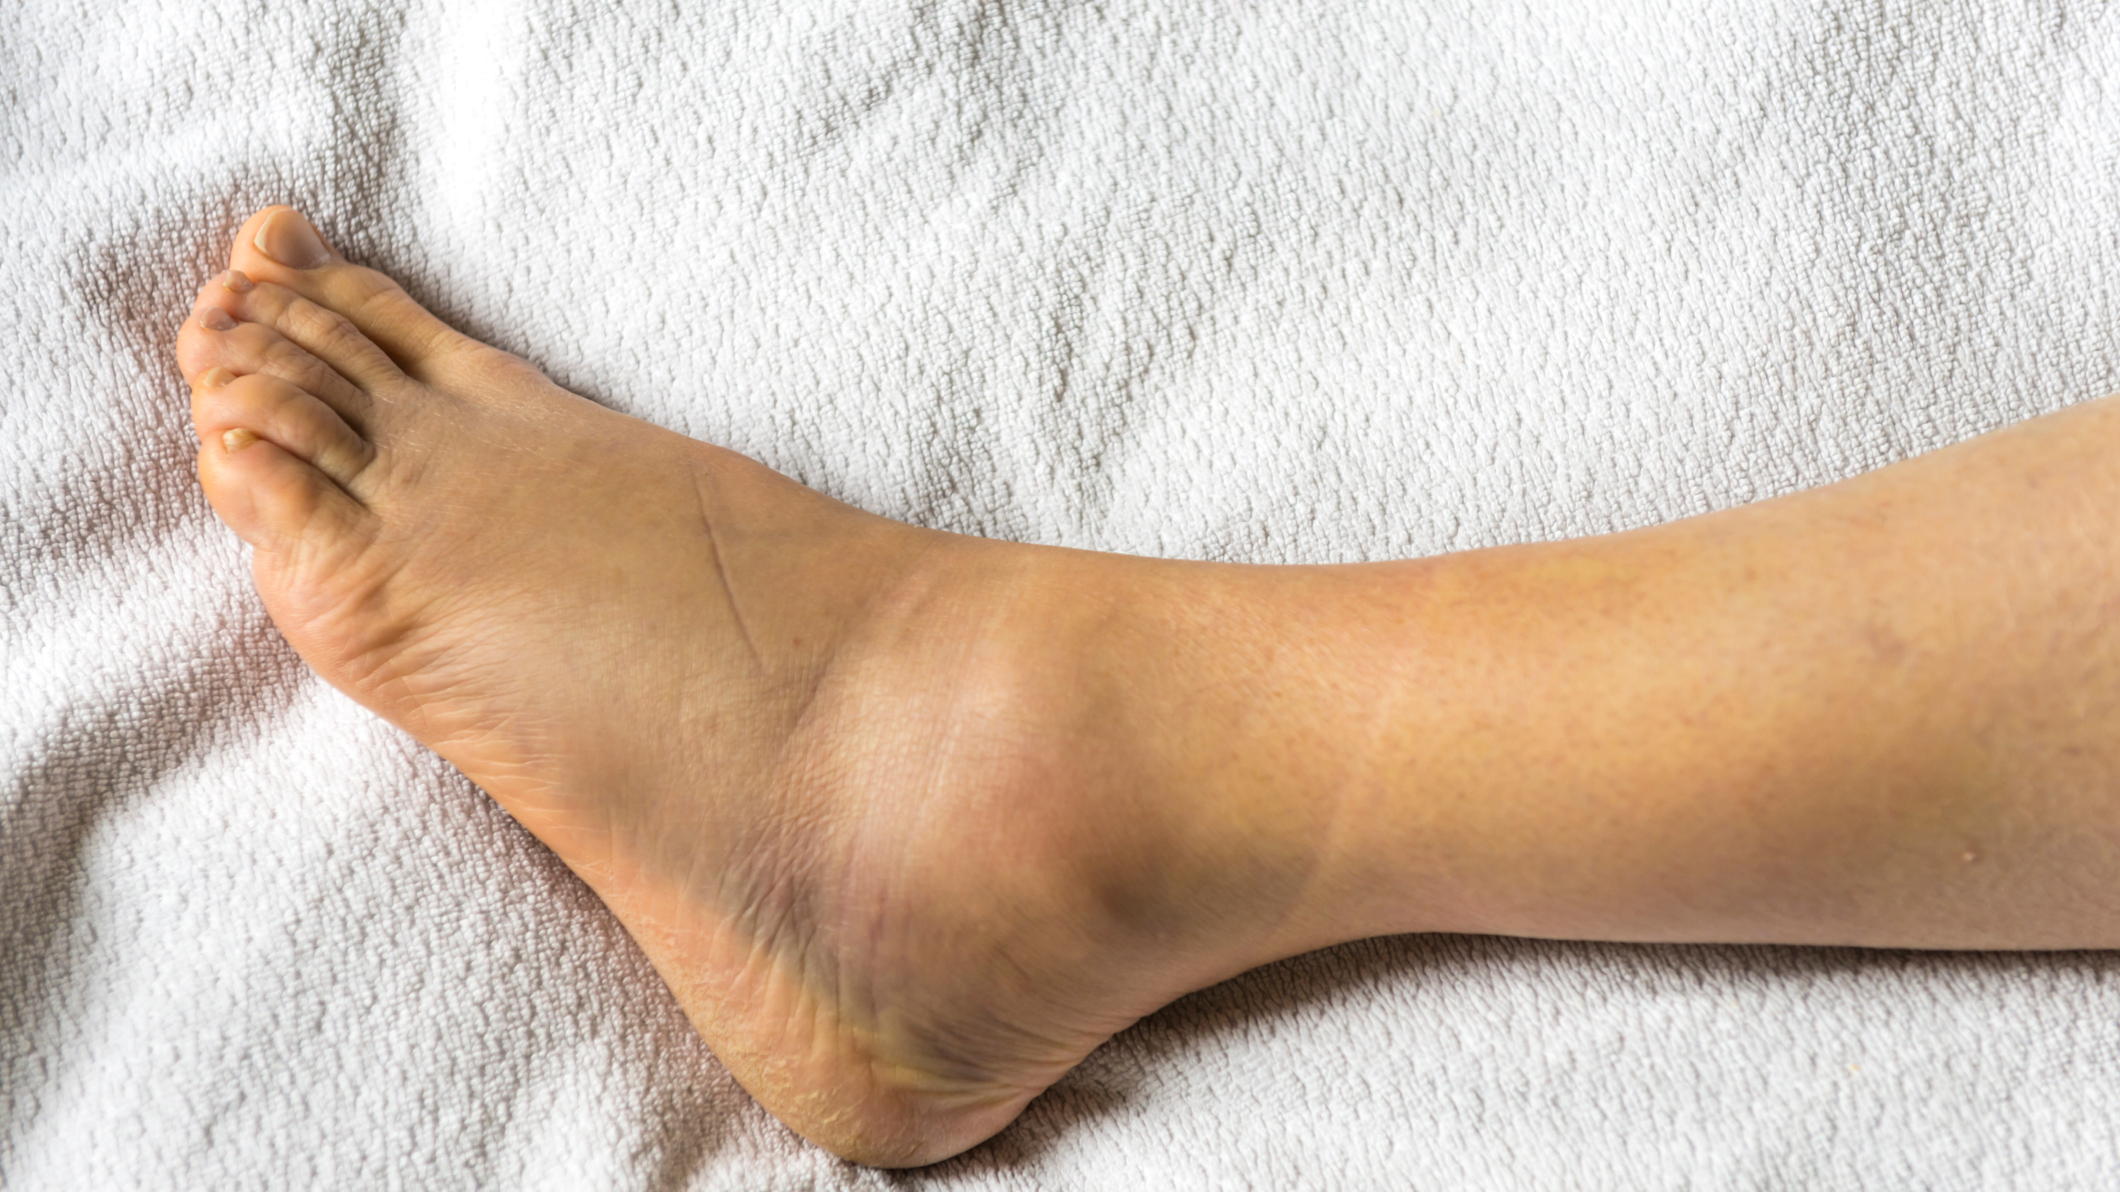 Ankle Arthritis Exercises and How to Do Them